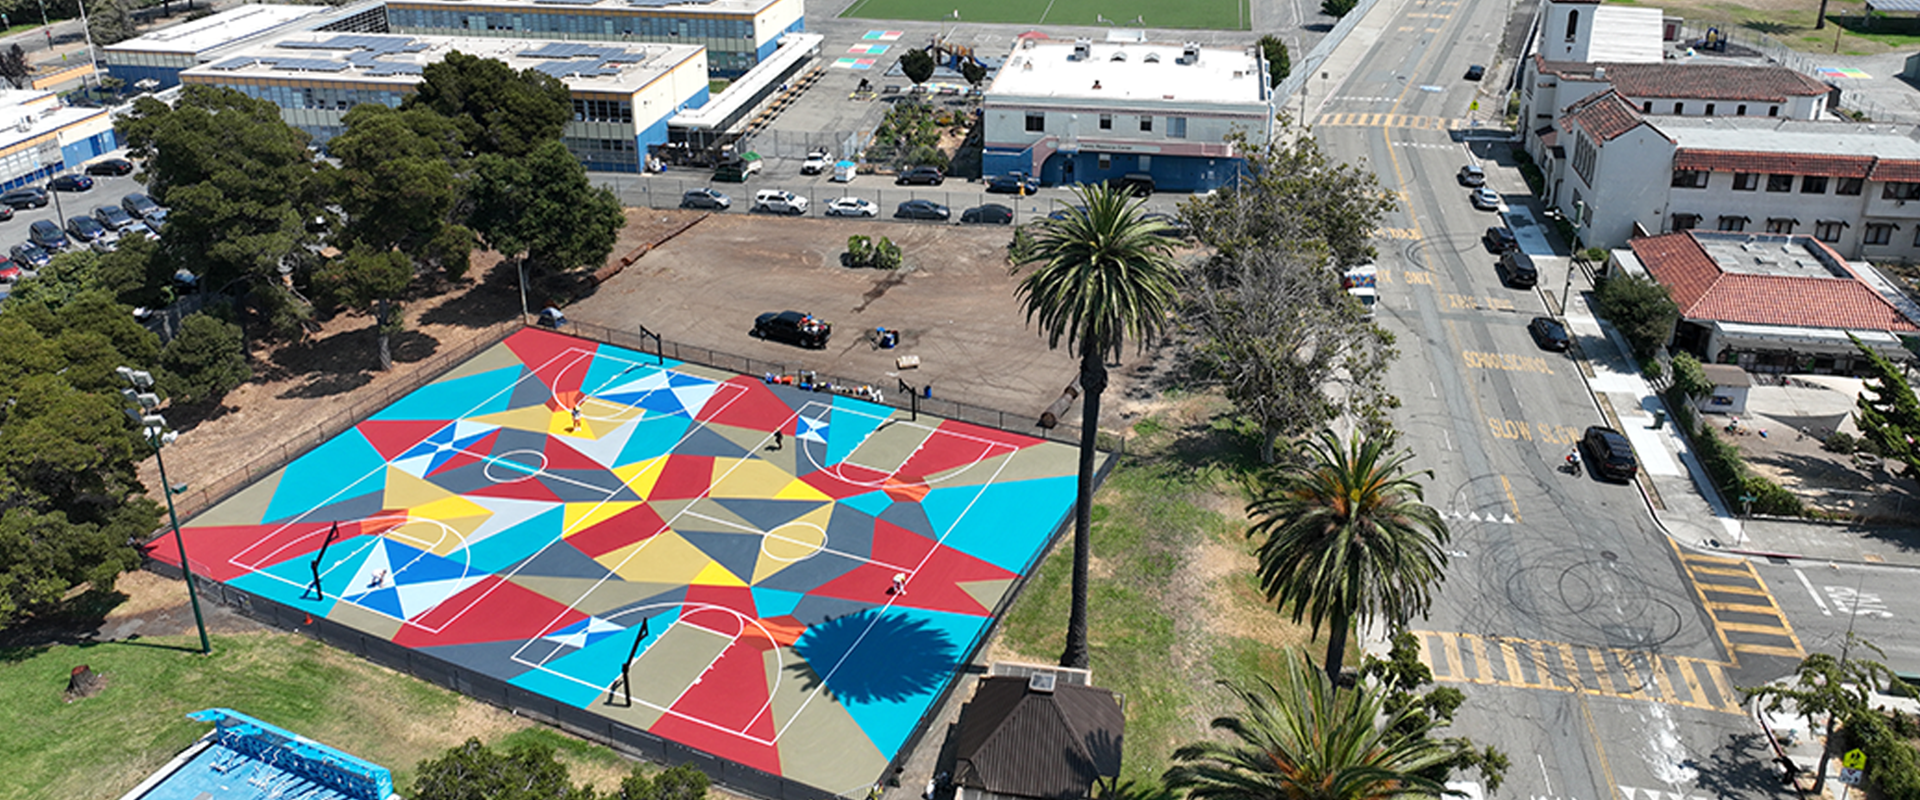 Aerial view of refubished basketball court at Lowell Park in Oakland